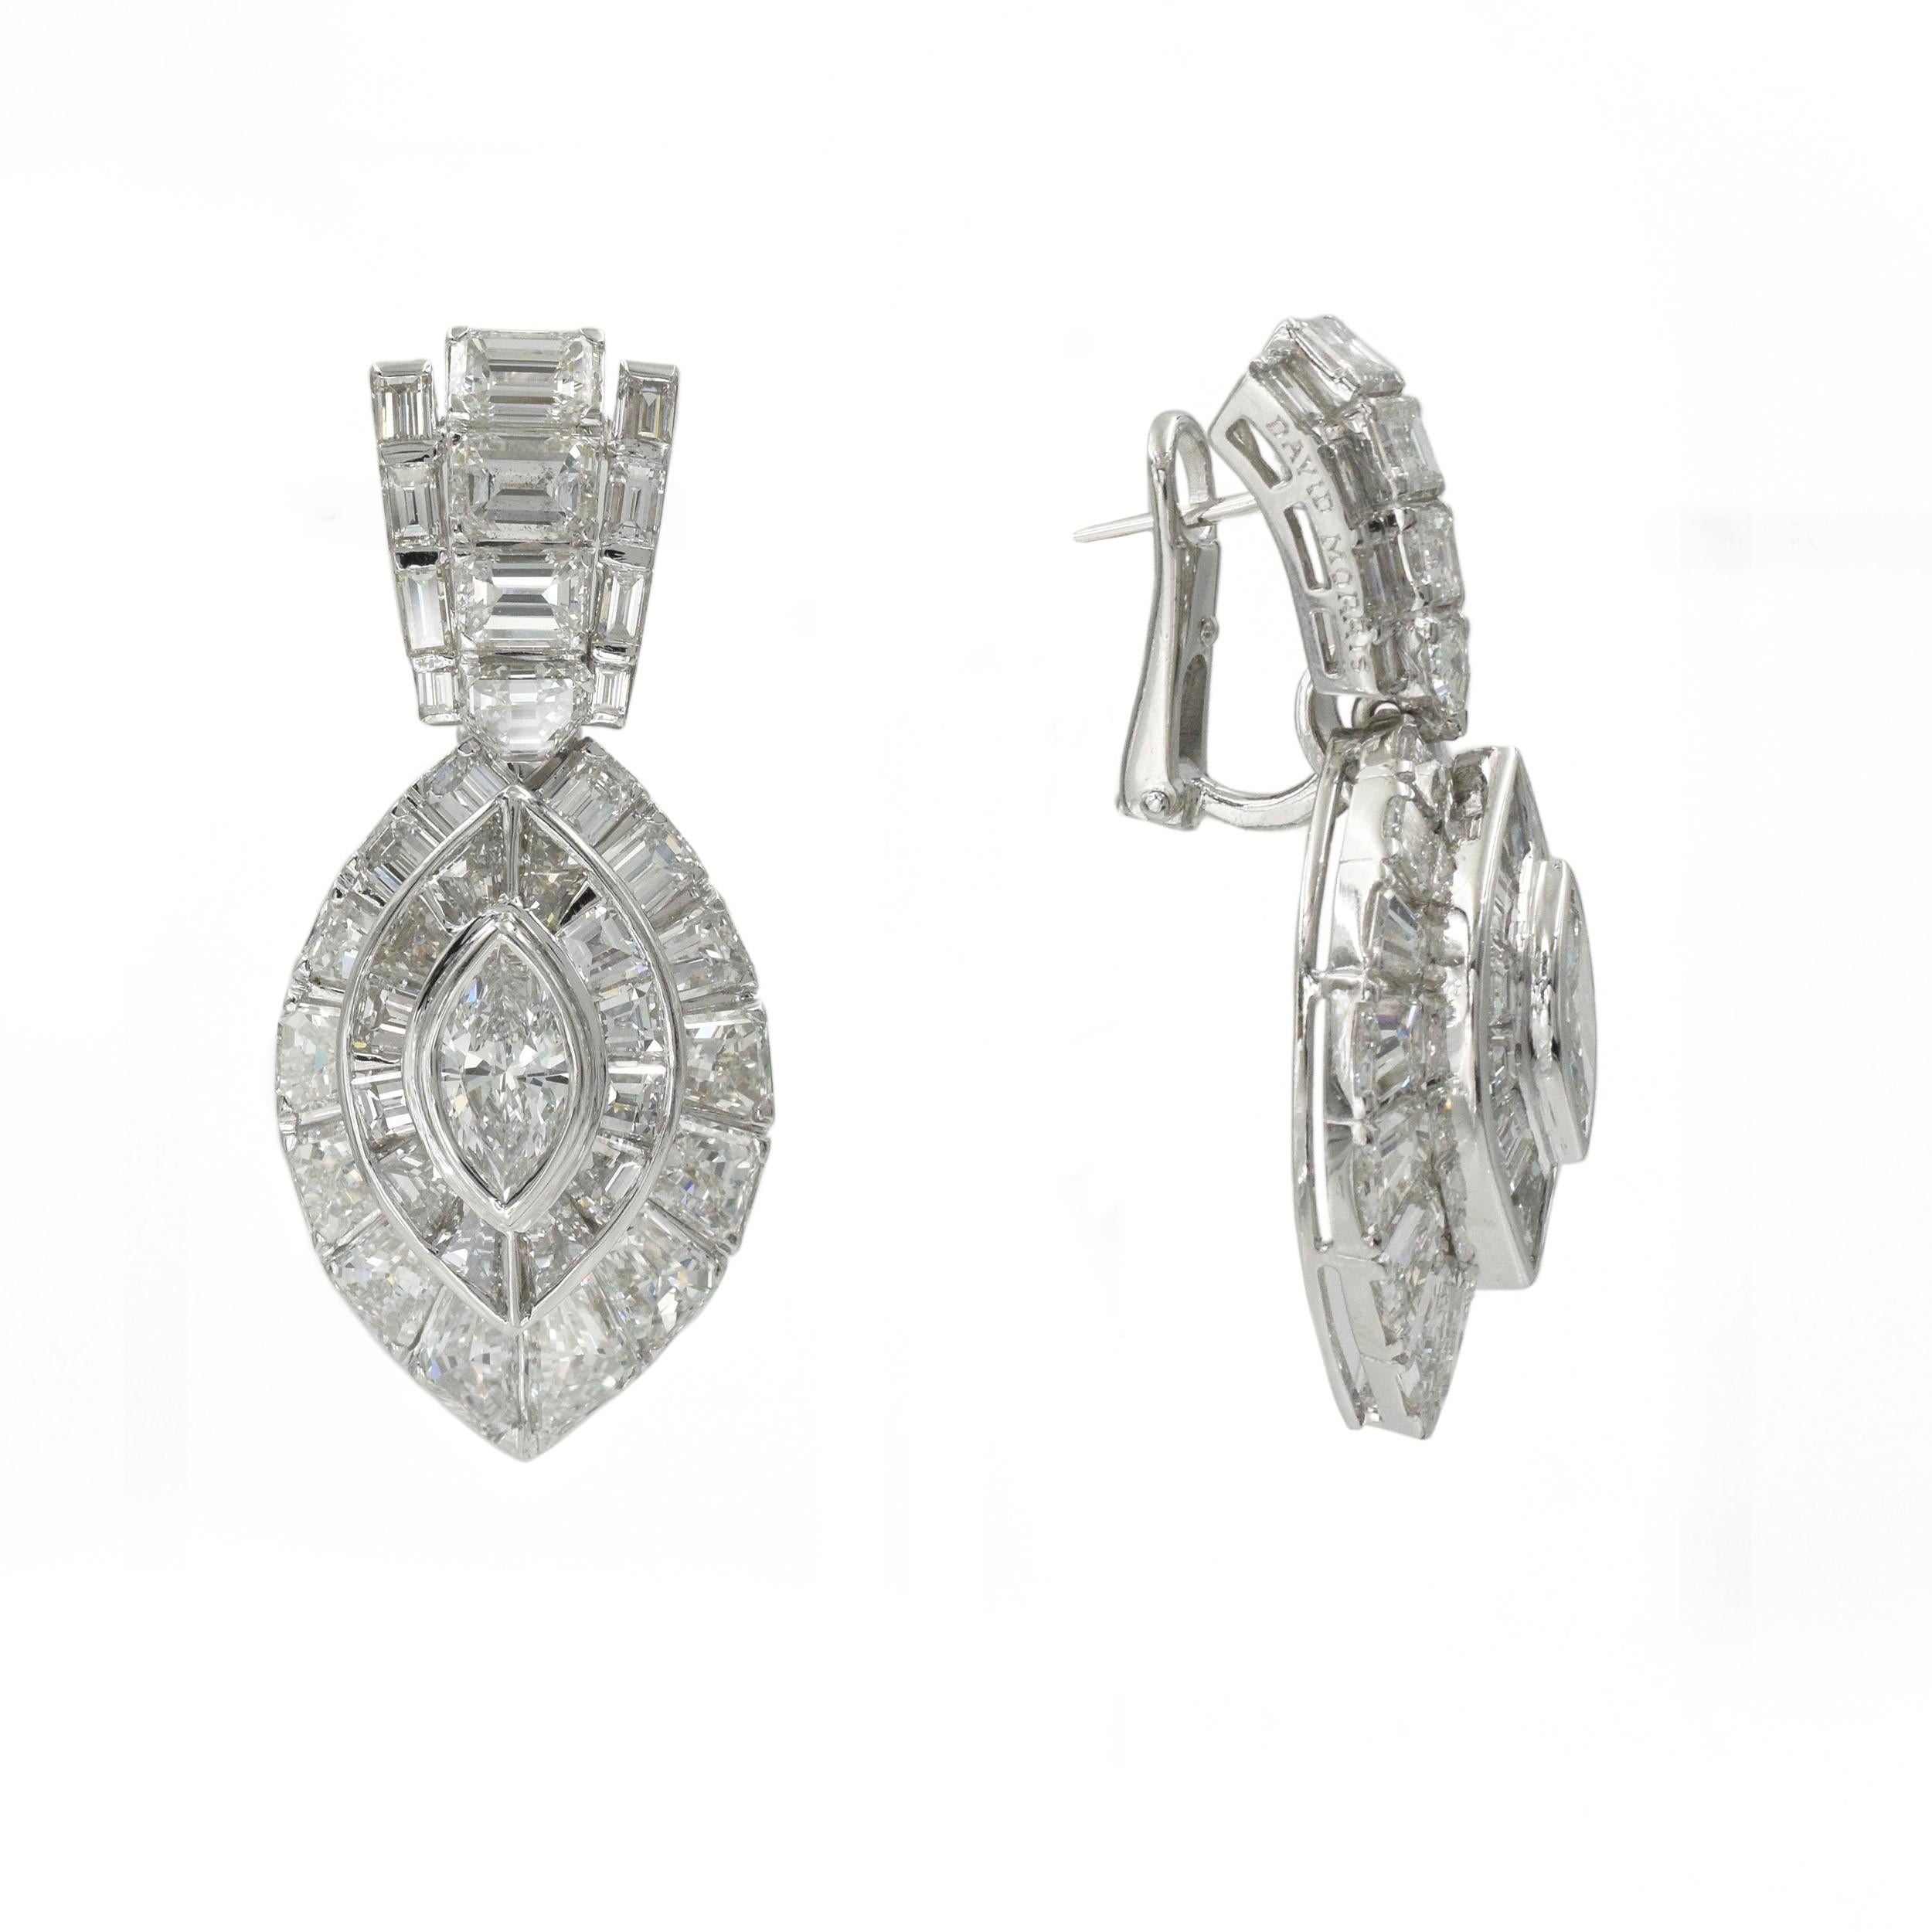 David Morris Diamond Earrings in White Gold In Excellent Condition For Sale In New York, NY